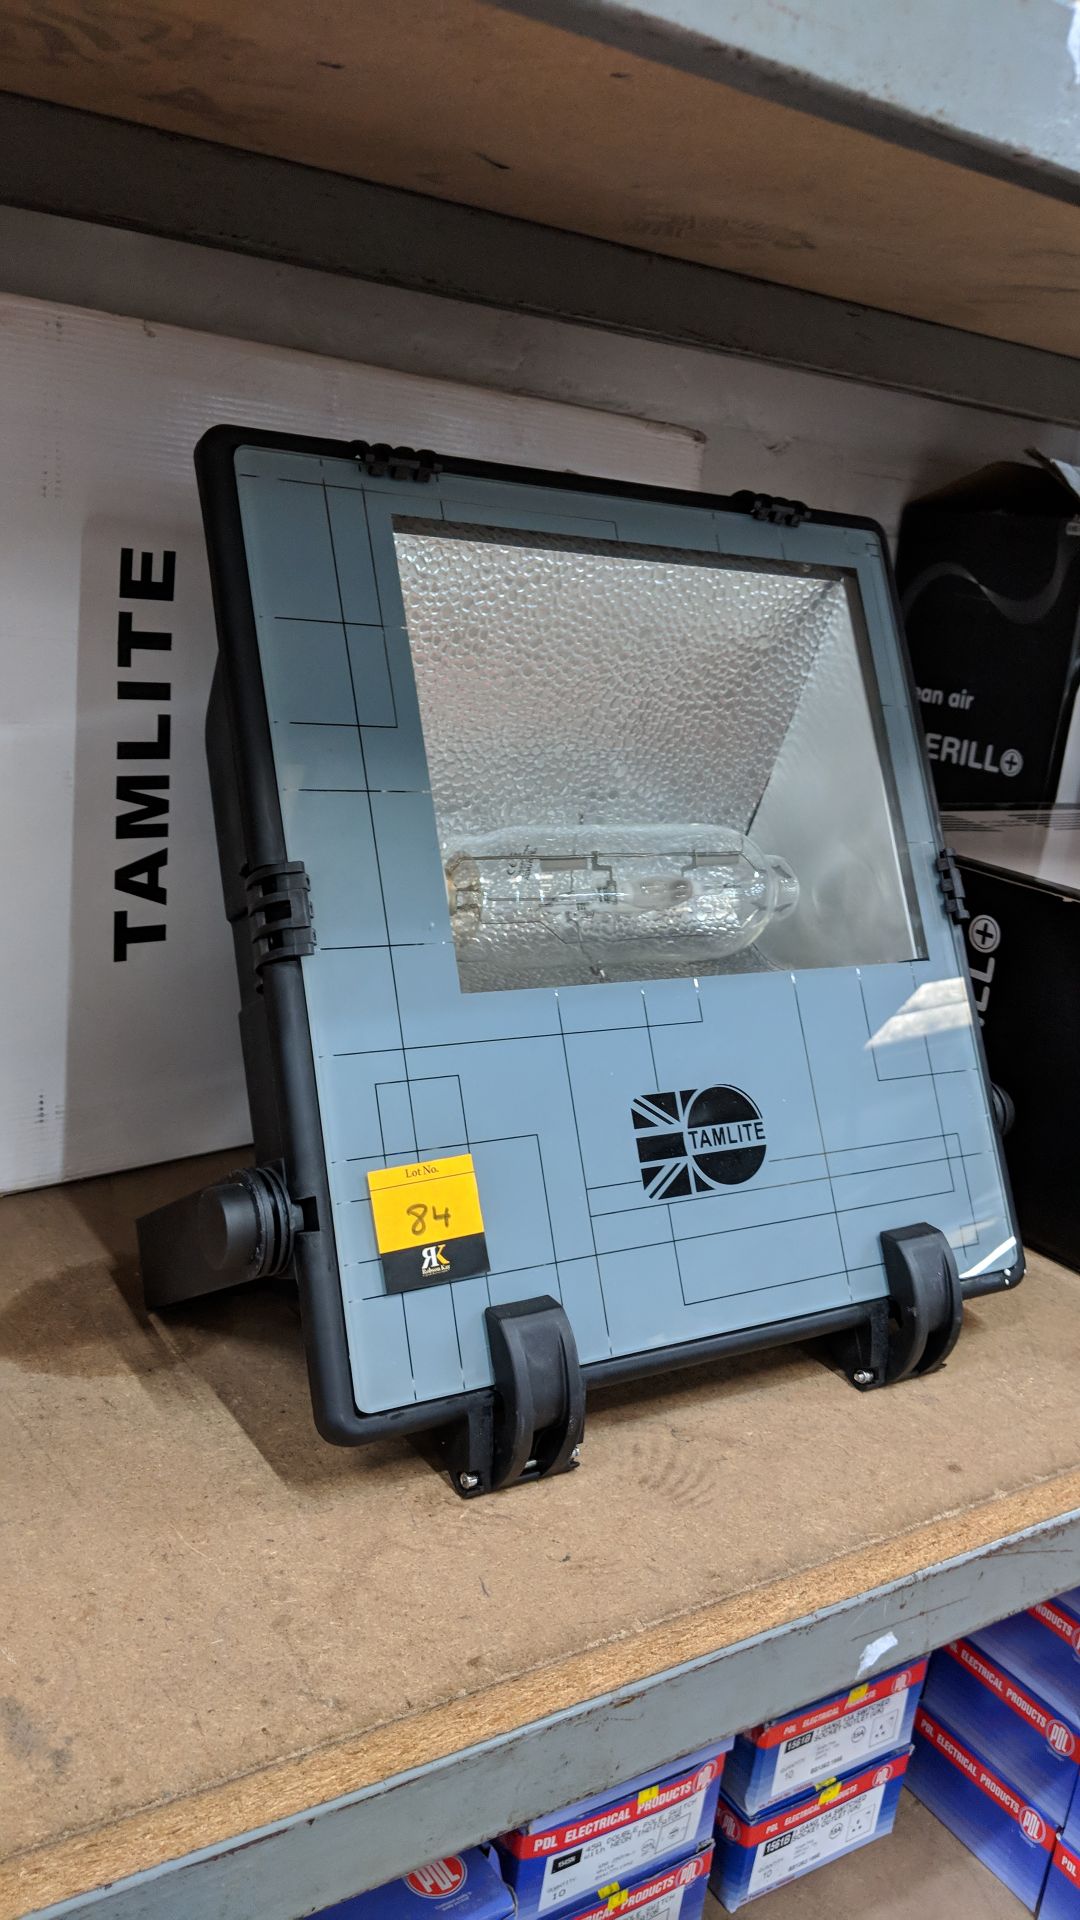 Tamlite 320W floodlight The vast majority of products in this auction appear new, complete and